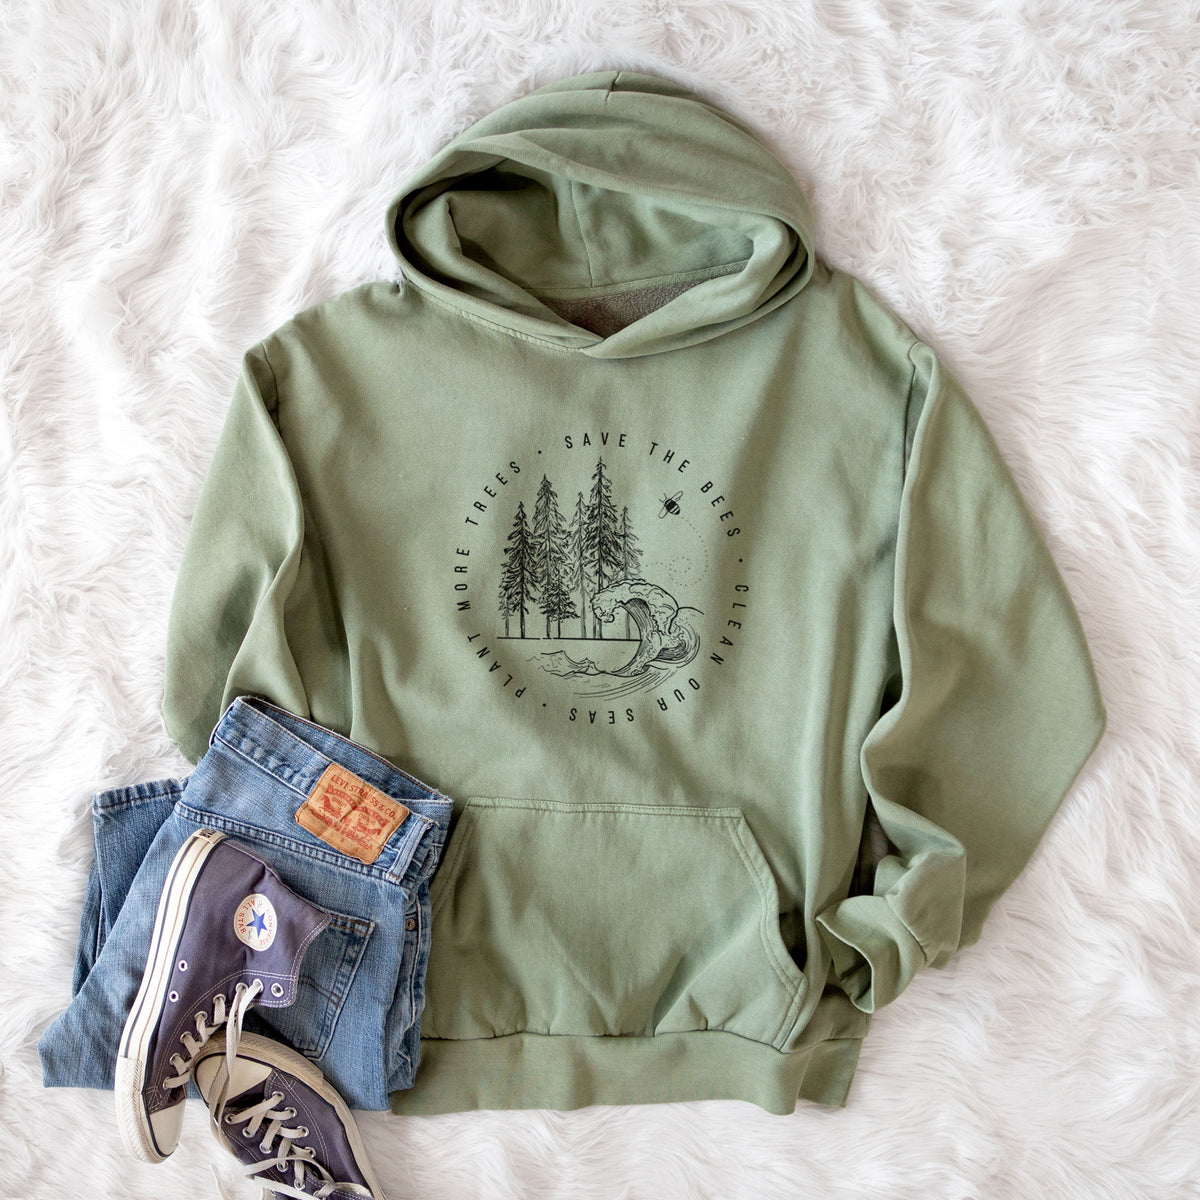 Save the Bees, Clean our Seas, Plant more Trees  - Urban Heavyweight Hoodie